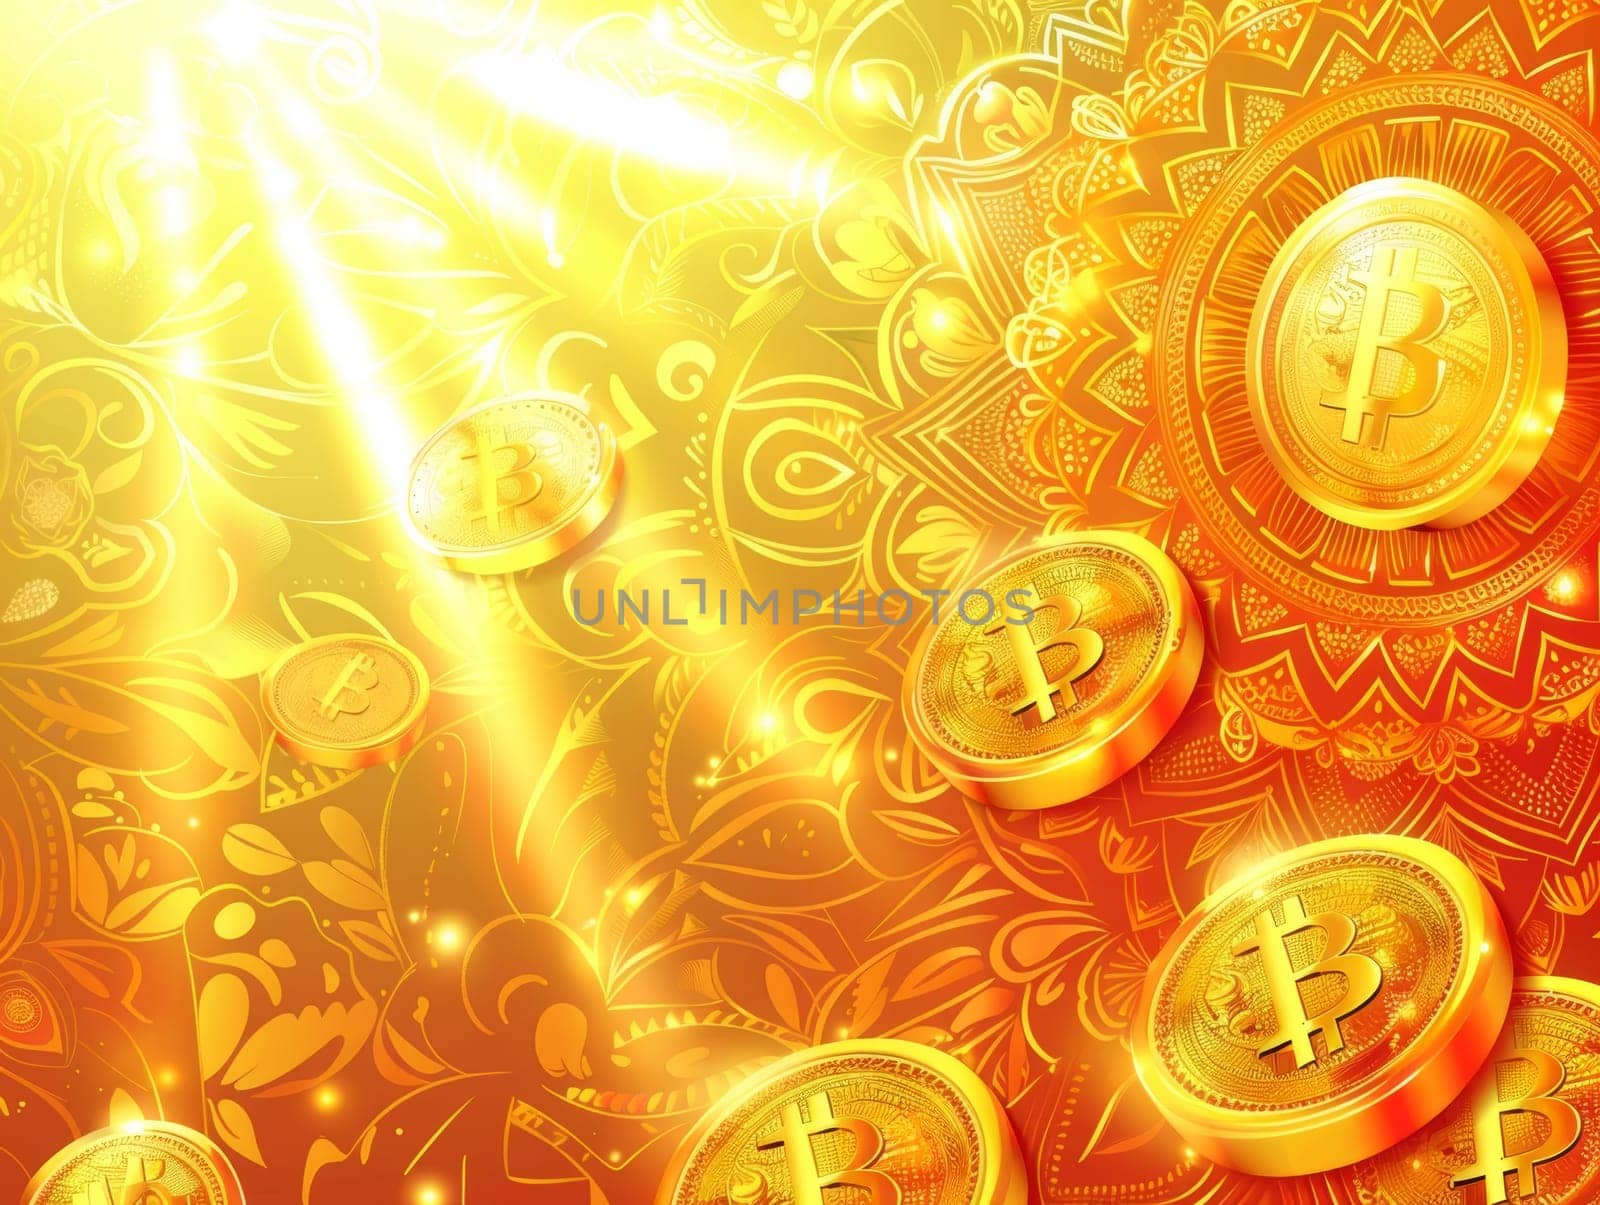 A dazzling illustration capturing the intersection of digital currency and traditional ornamental art, symbolizing wealth and innovation. by sfinks